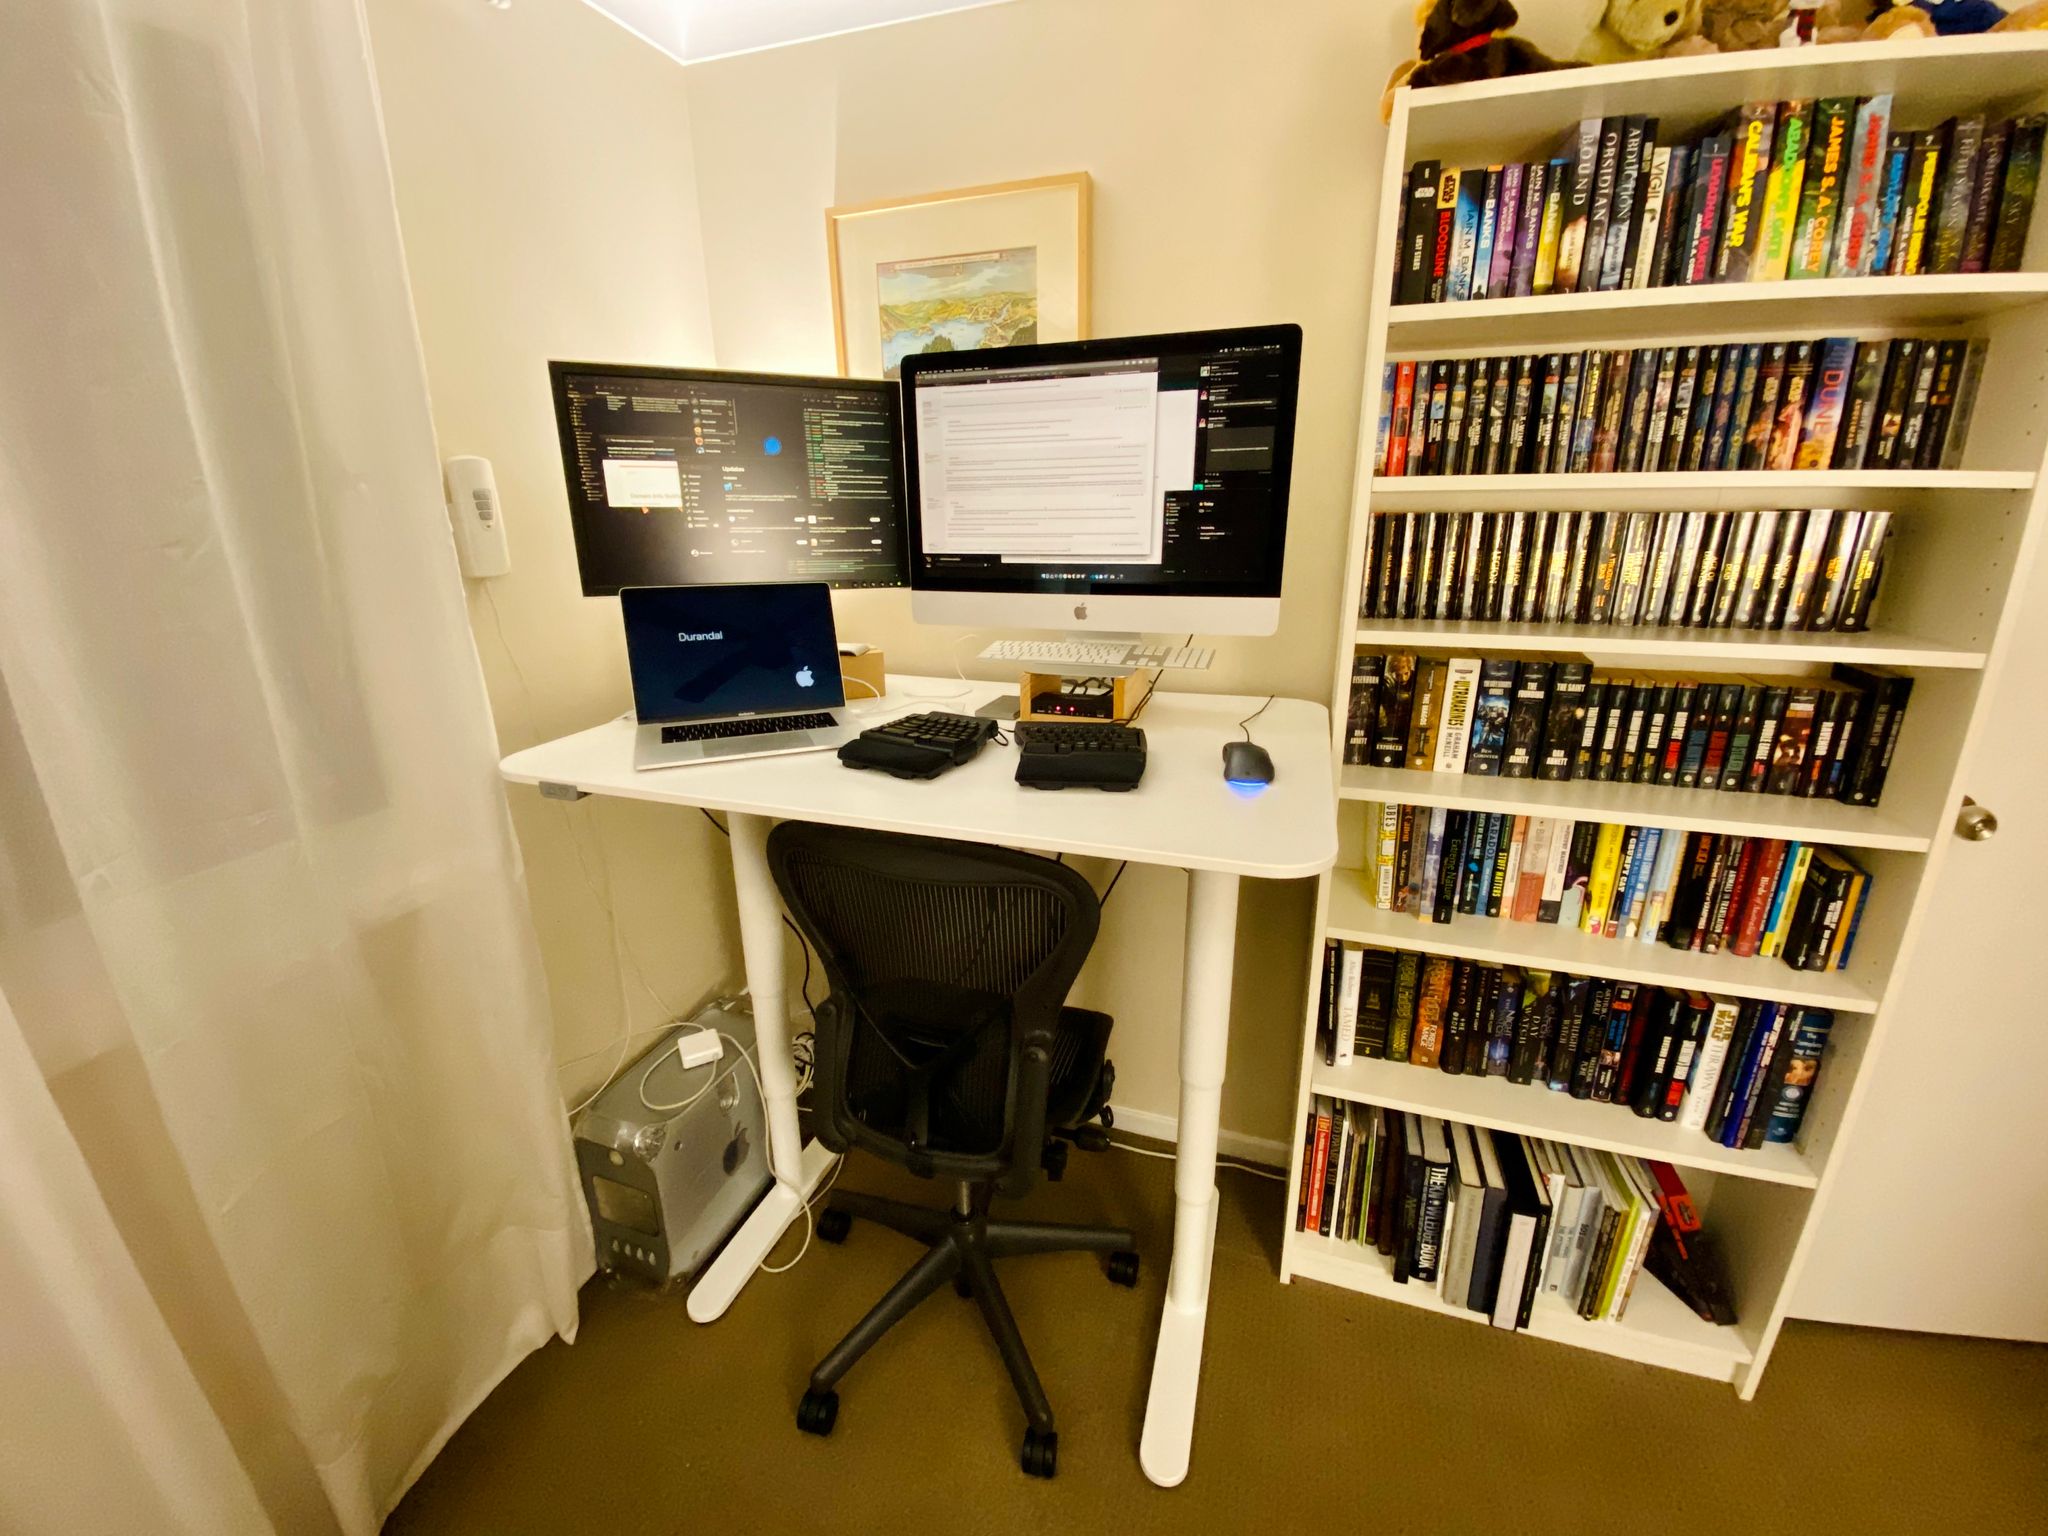 Another photo of the room with the same setup as the first photo except the desk is now a standing desk and is at its full standing position.